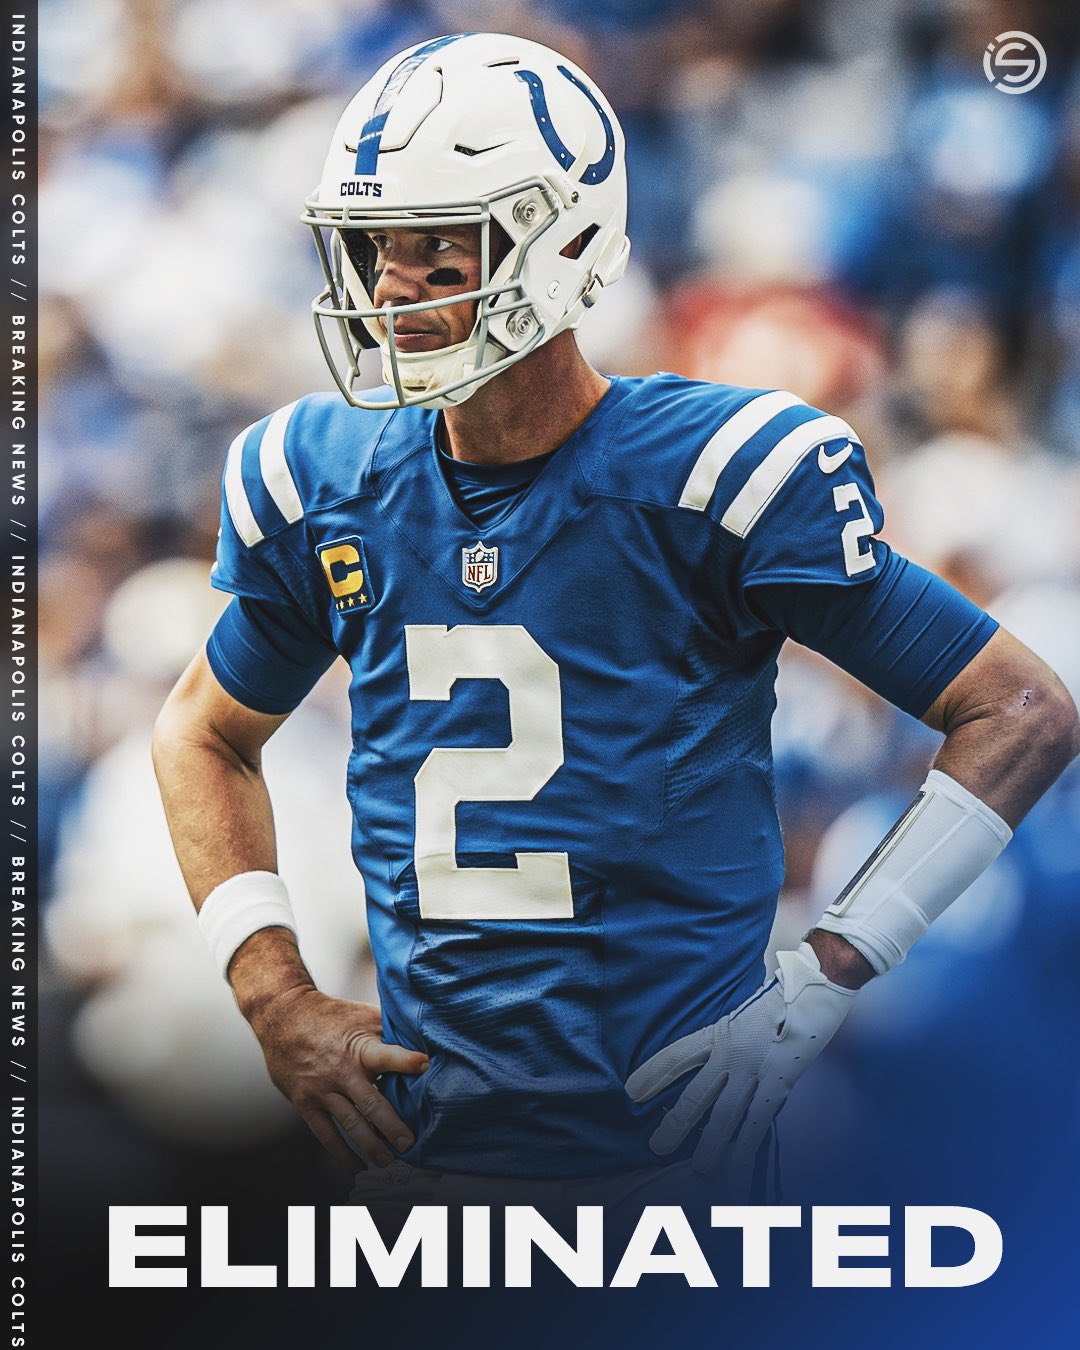 indianapolis colts breaking news